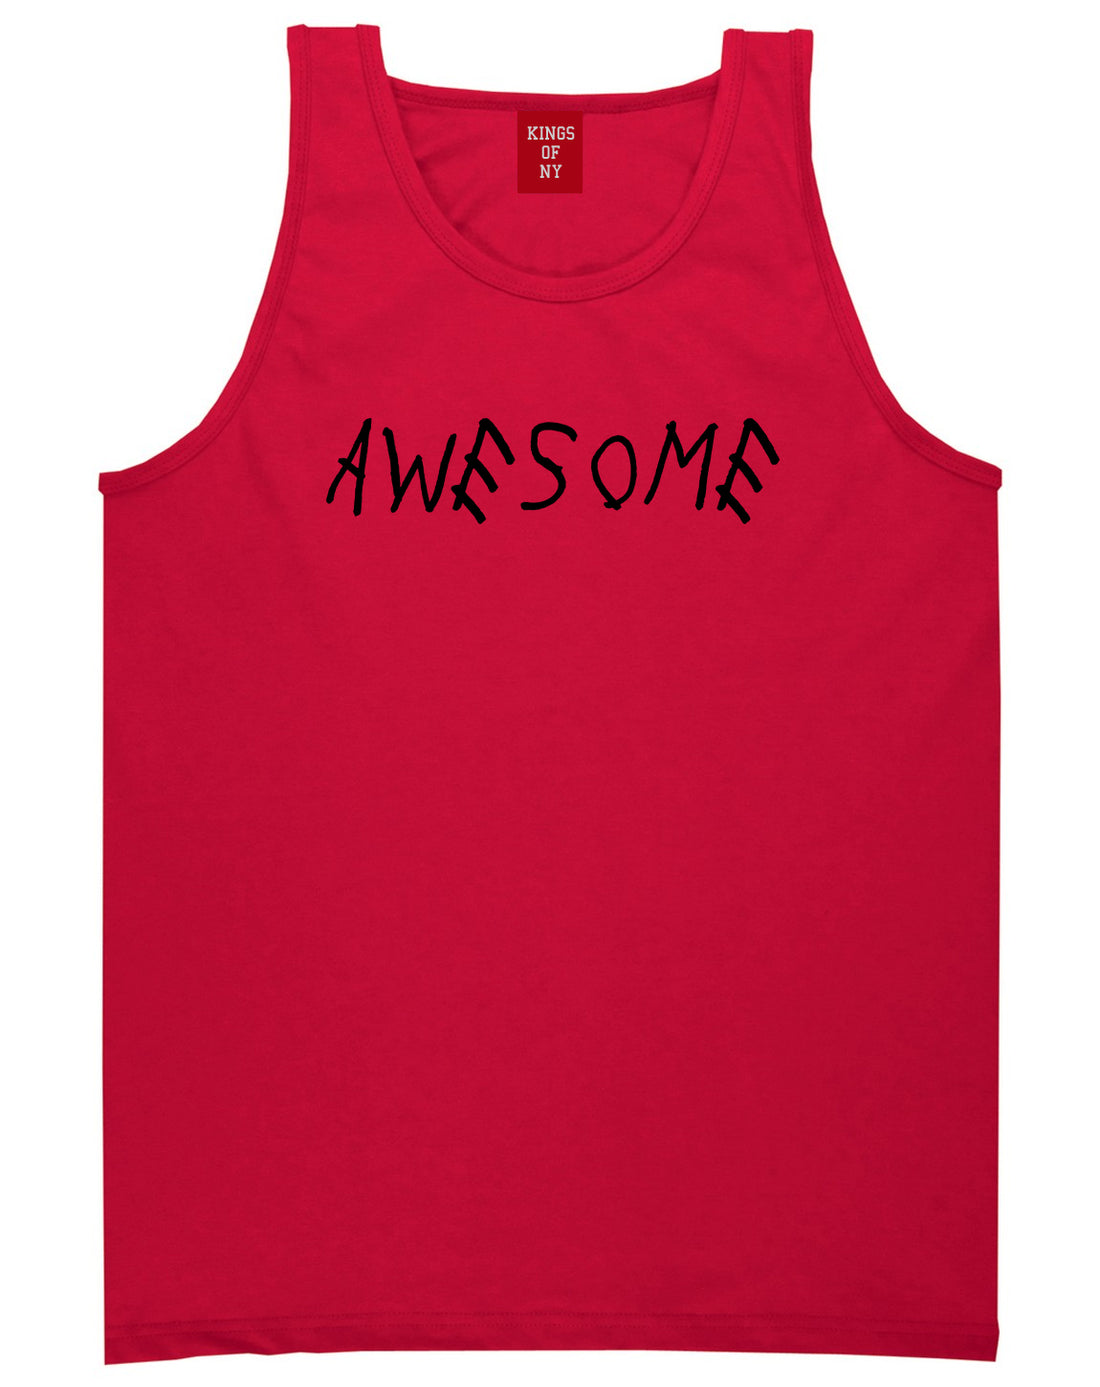 Awesome Red Tank Top Shirt by Kings Of NY